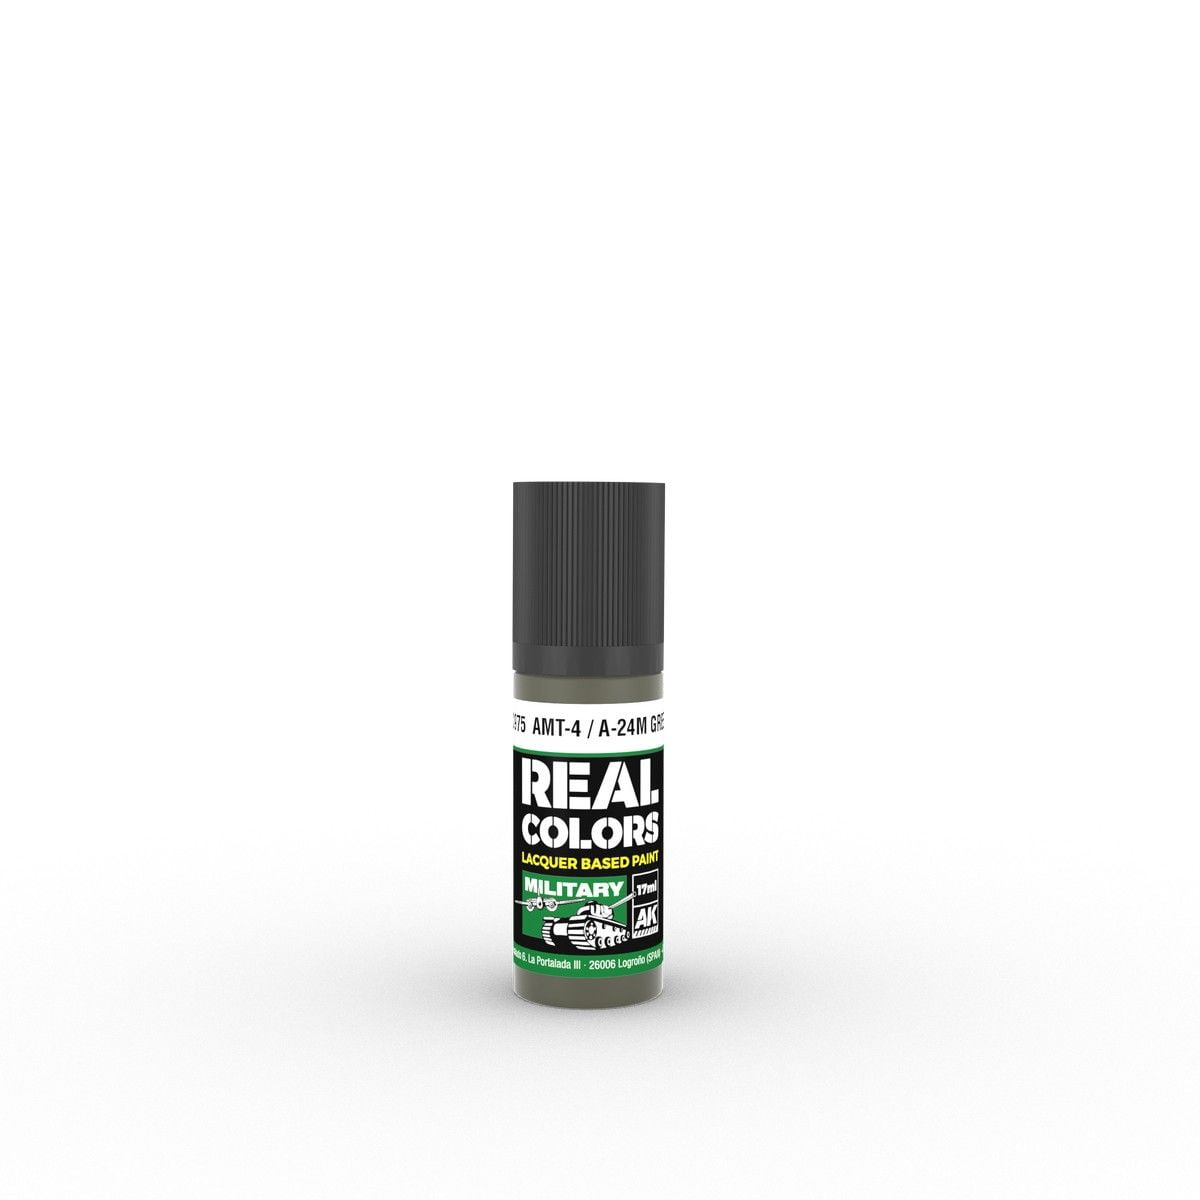 Real Colors Military: AMT-4 / A-24M Green 17ml